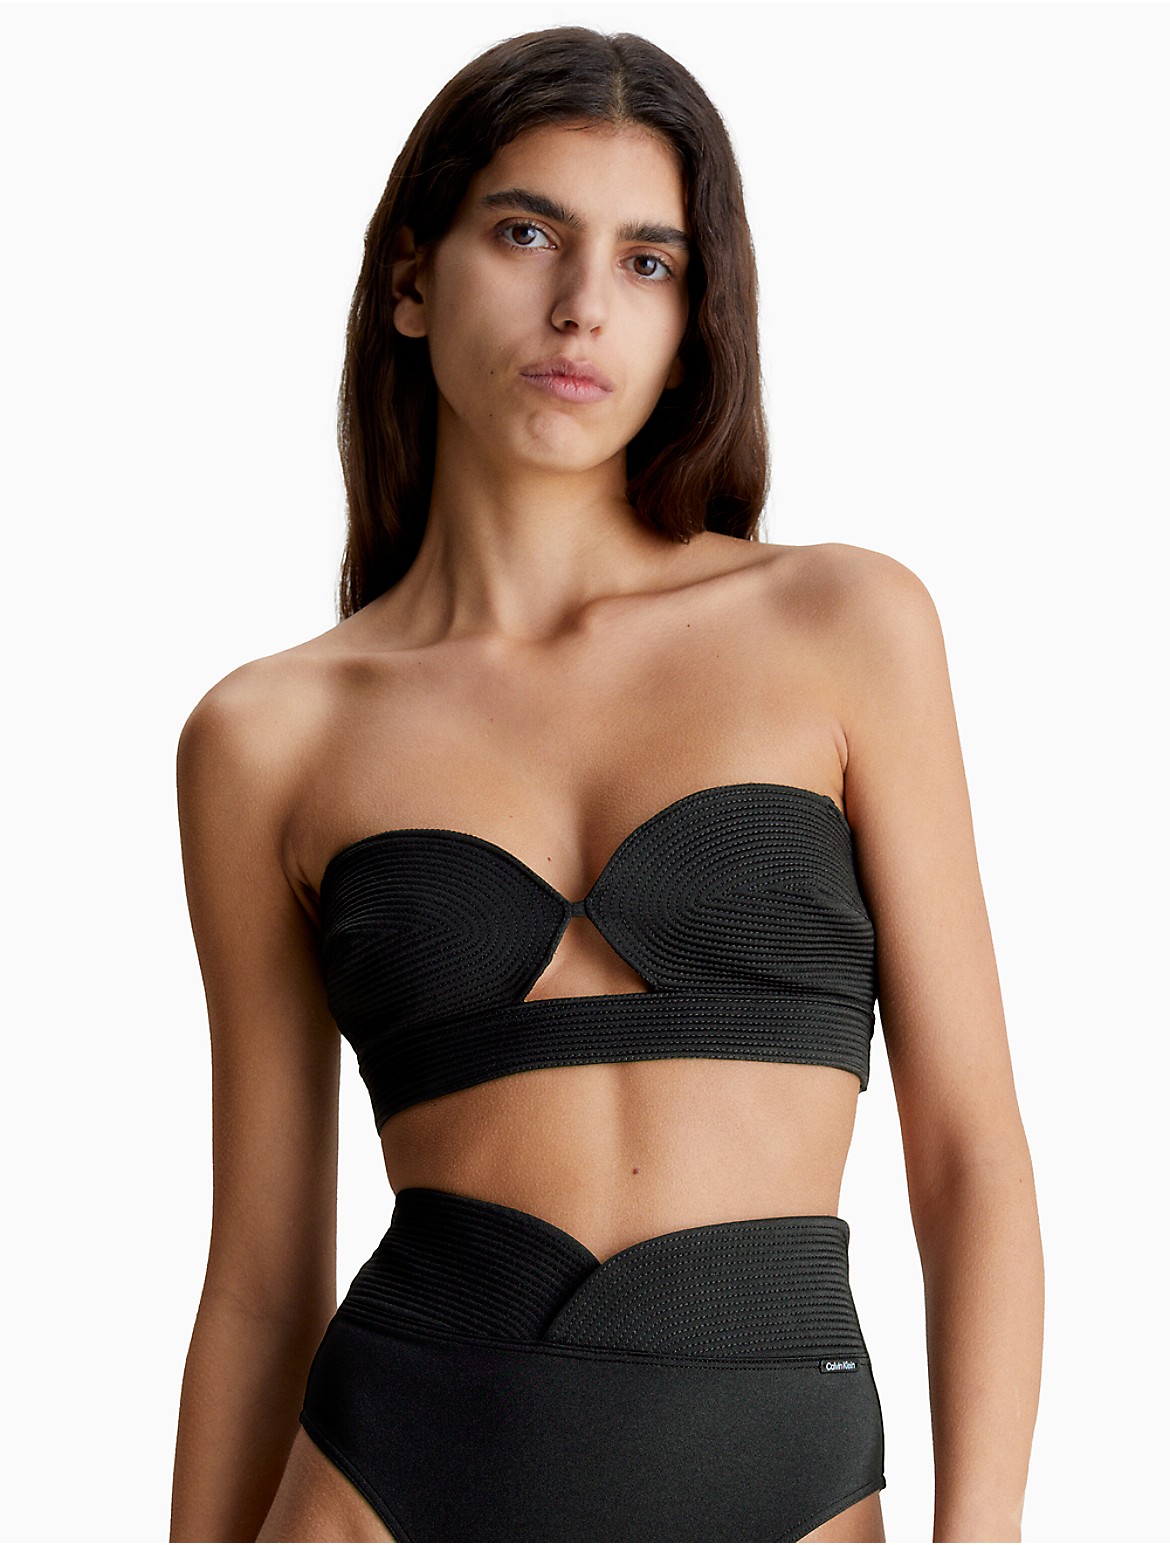 Eco Intimates - Stella Long Line bralette with Lace - Clean + Conscious